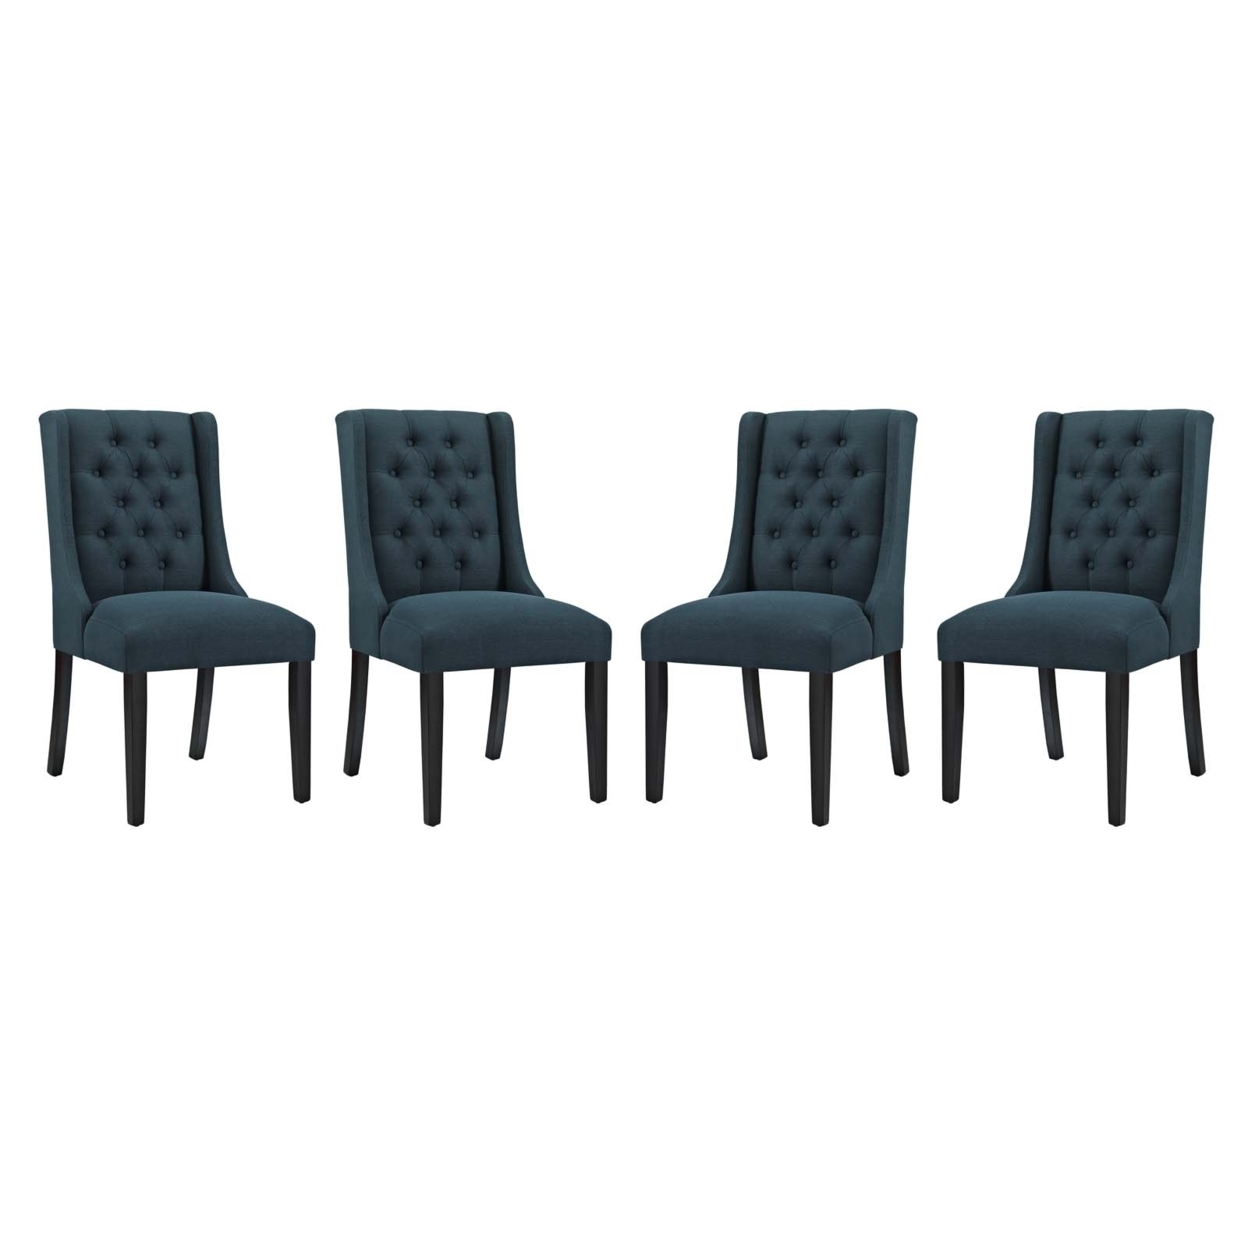 Baronet Dining Chair Fabric Set Of 4, Azure